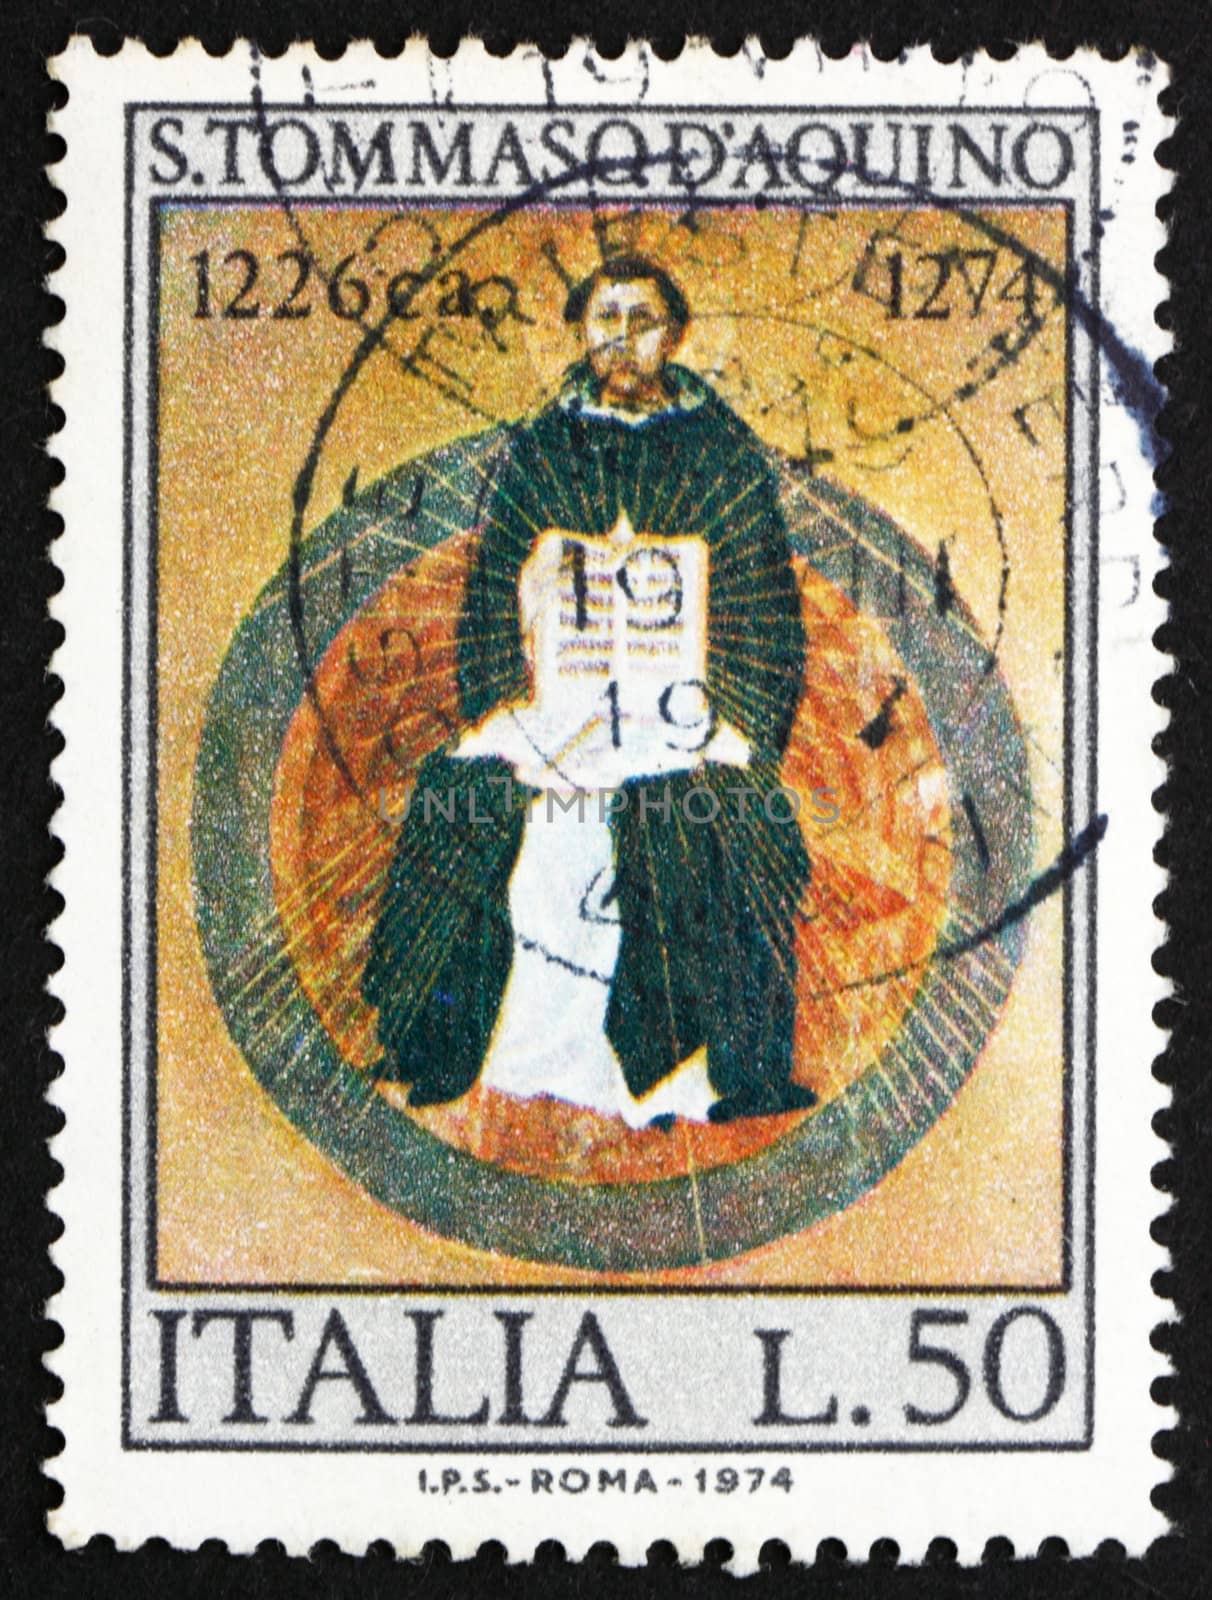 ITALY - CIRCA 1974: a stamp printed in the Italy shows St. Thomas Aquinas, by Francesco Traini, Scholastic Philosopher, 700th Death Anniversary, circa 1974